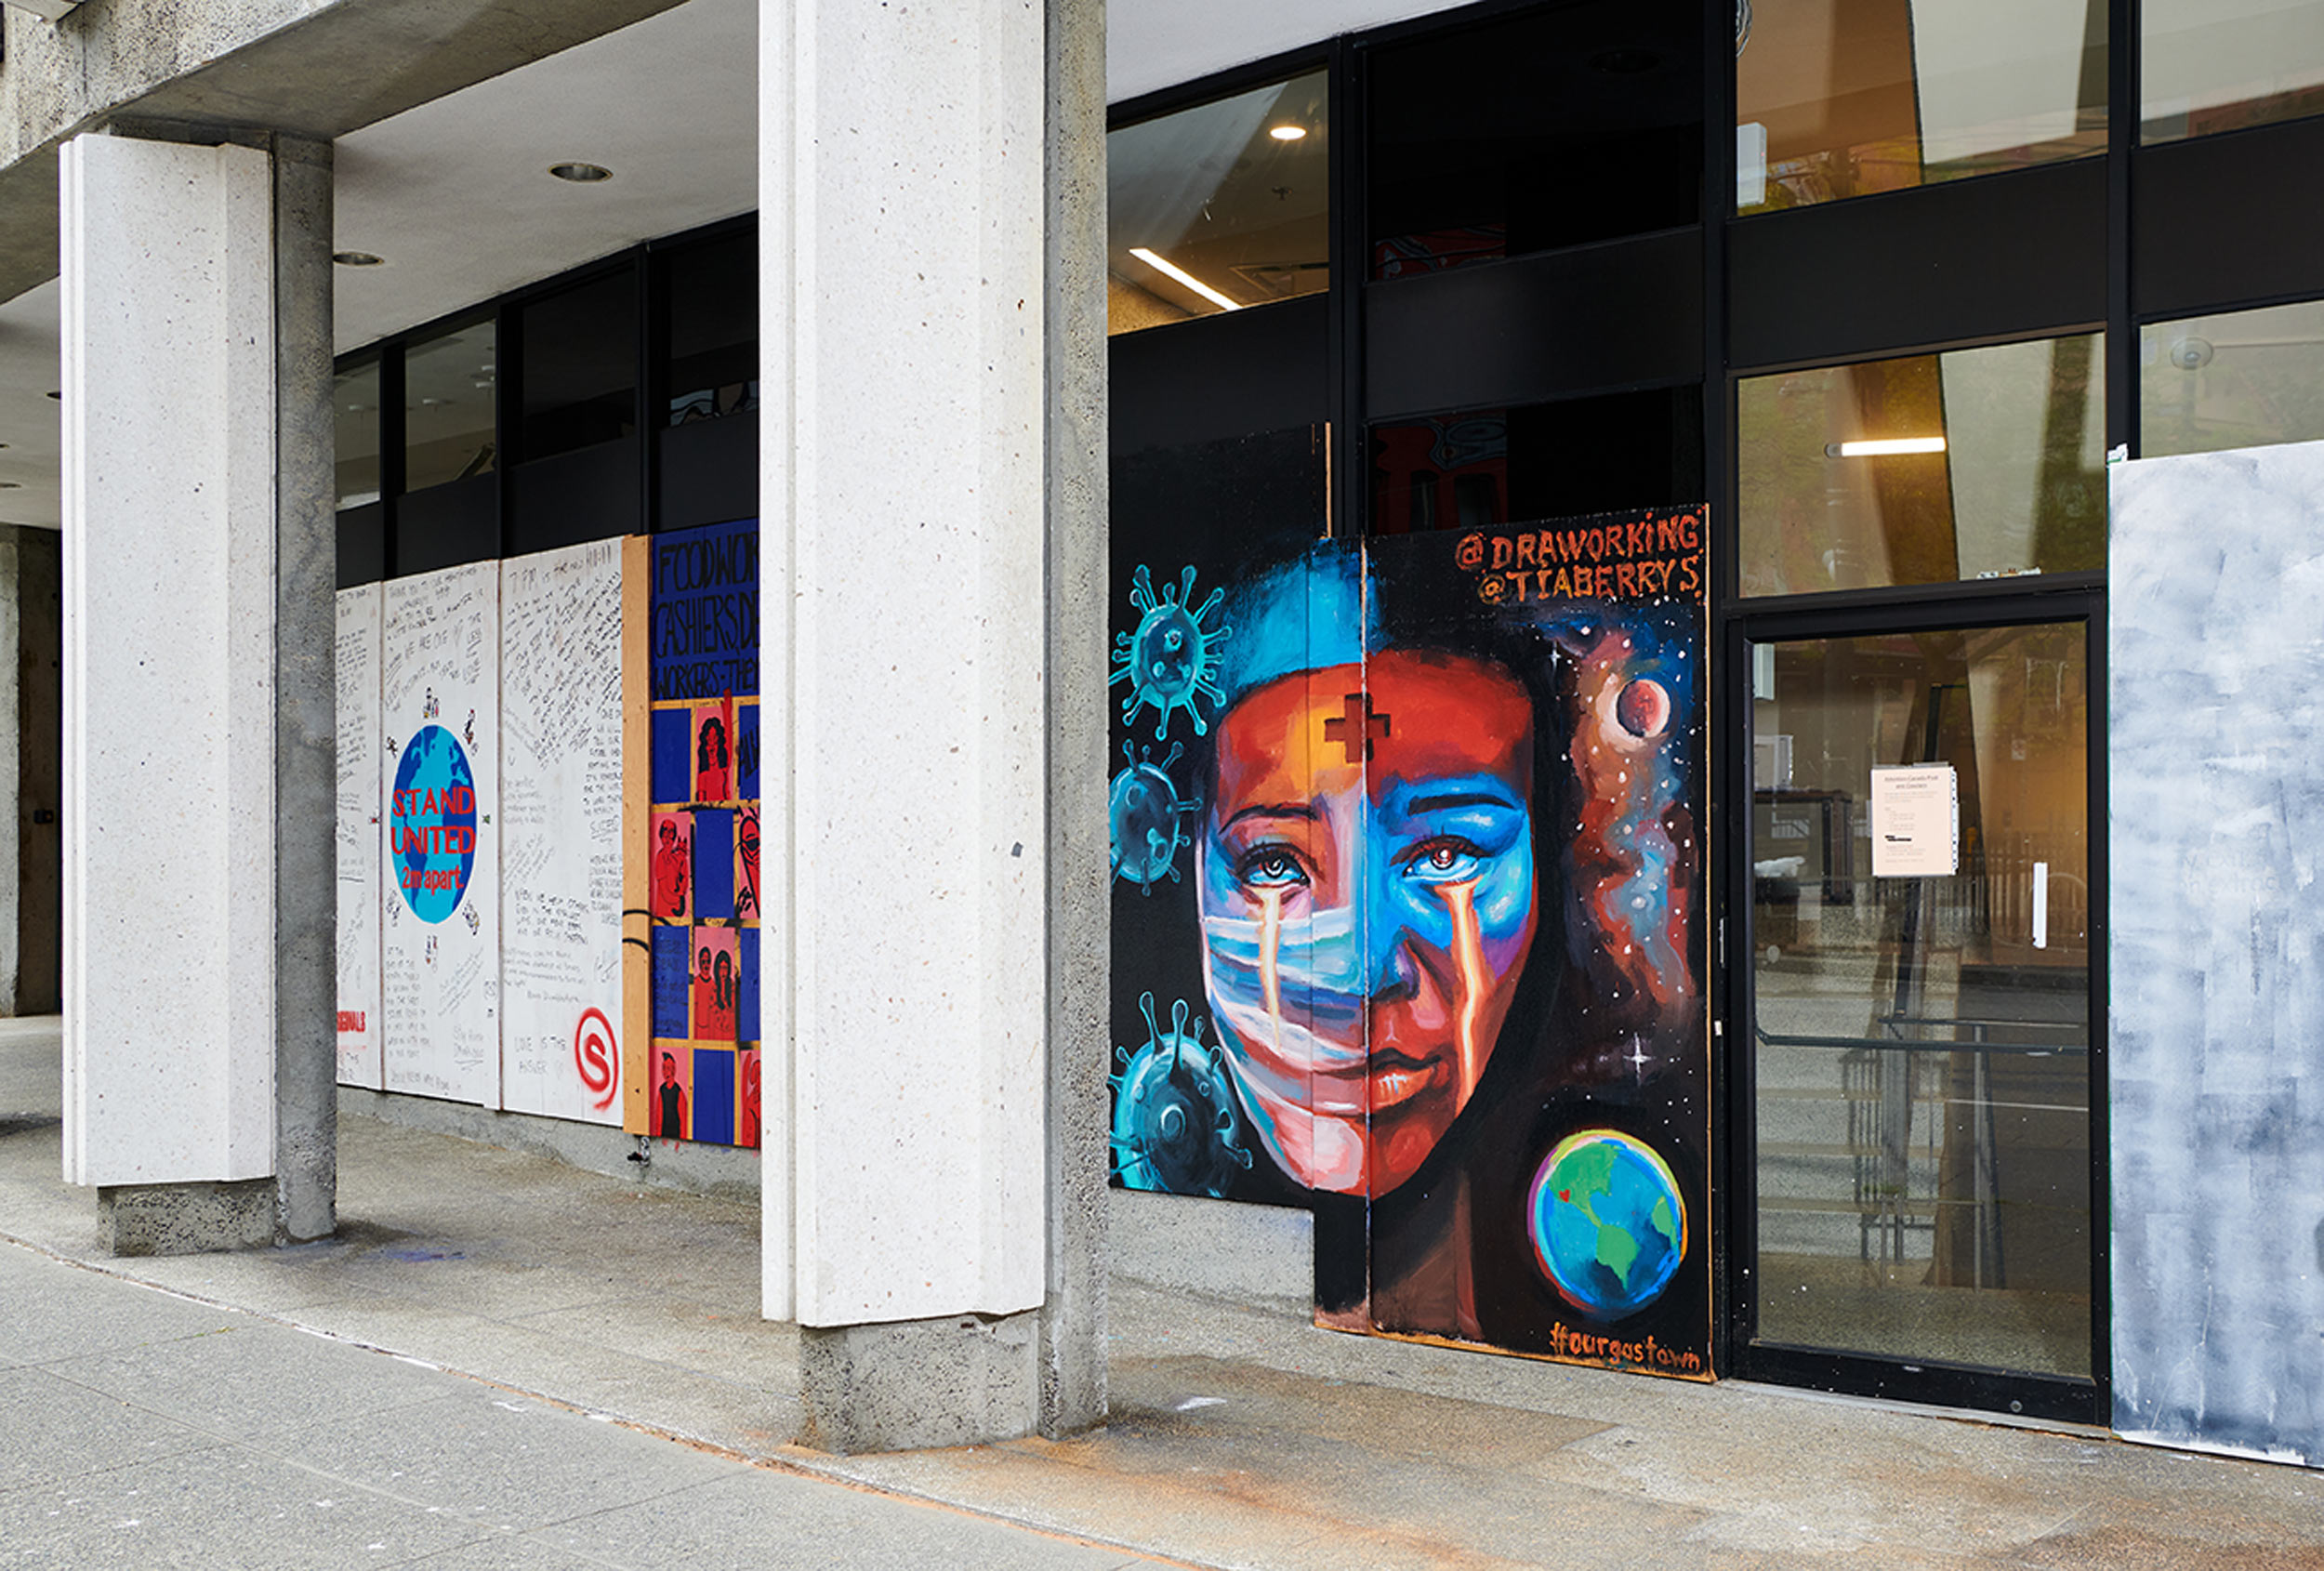 2020-Pandemic-Murals-of-Gratitude-Gastown-Vancouver-Art-Personal-Project-Erich-Saide-Photographer-Artist-Tia-Berry-Andrei-Draworking